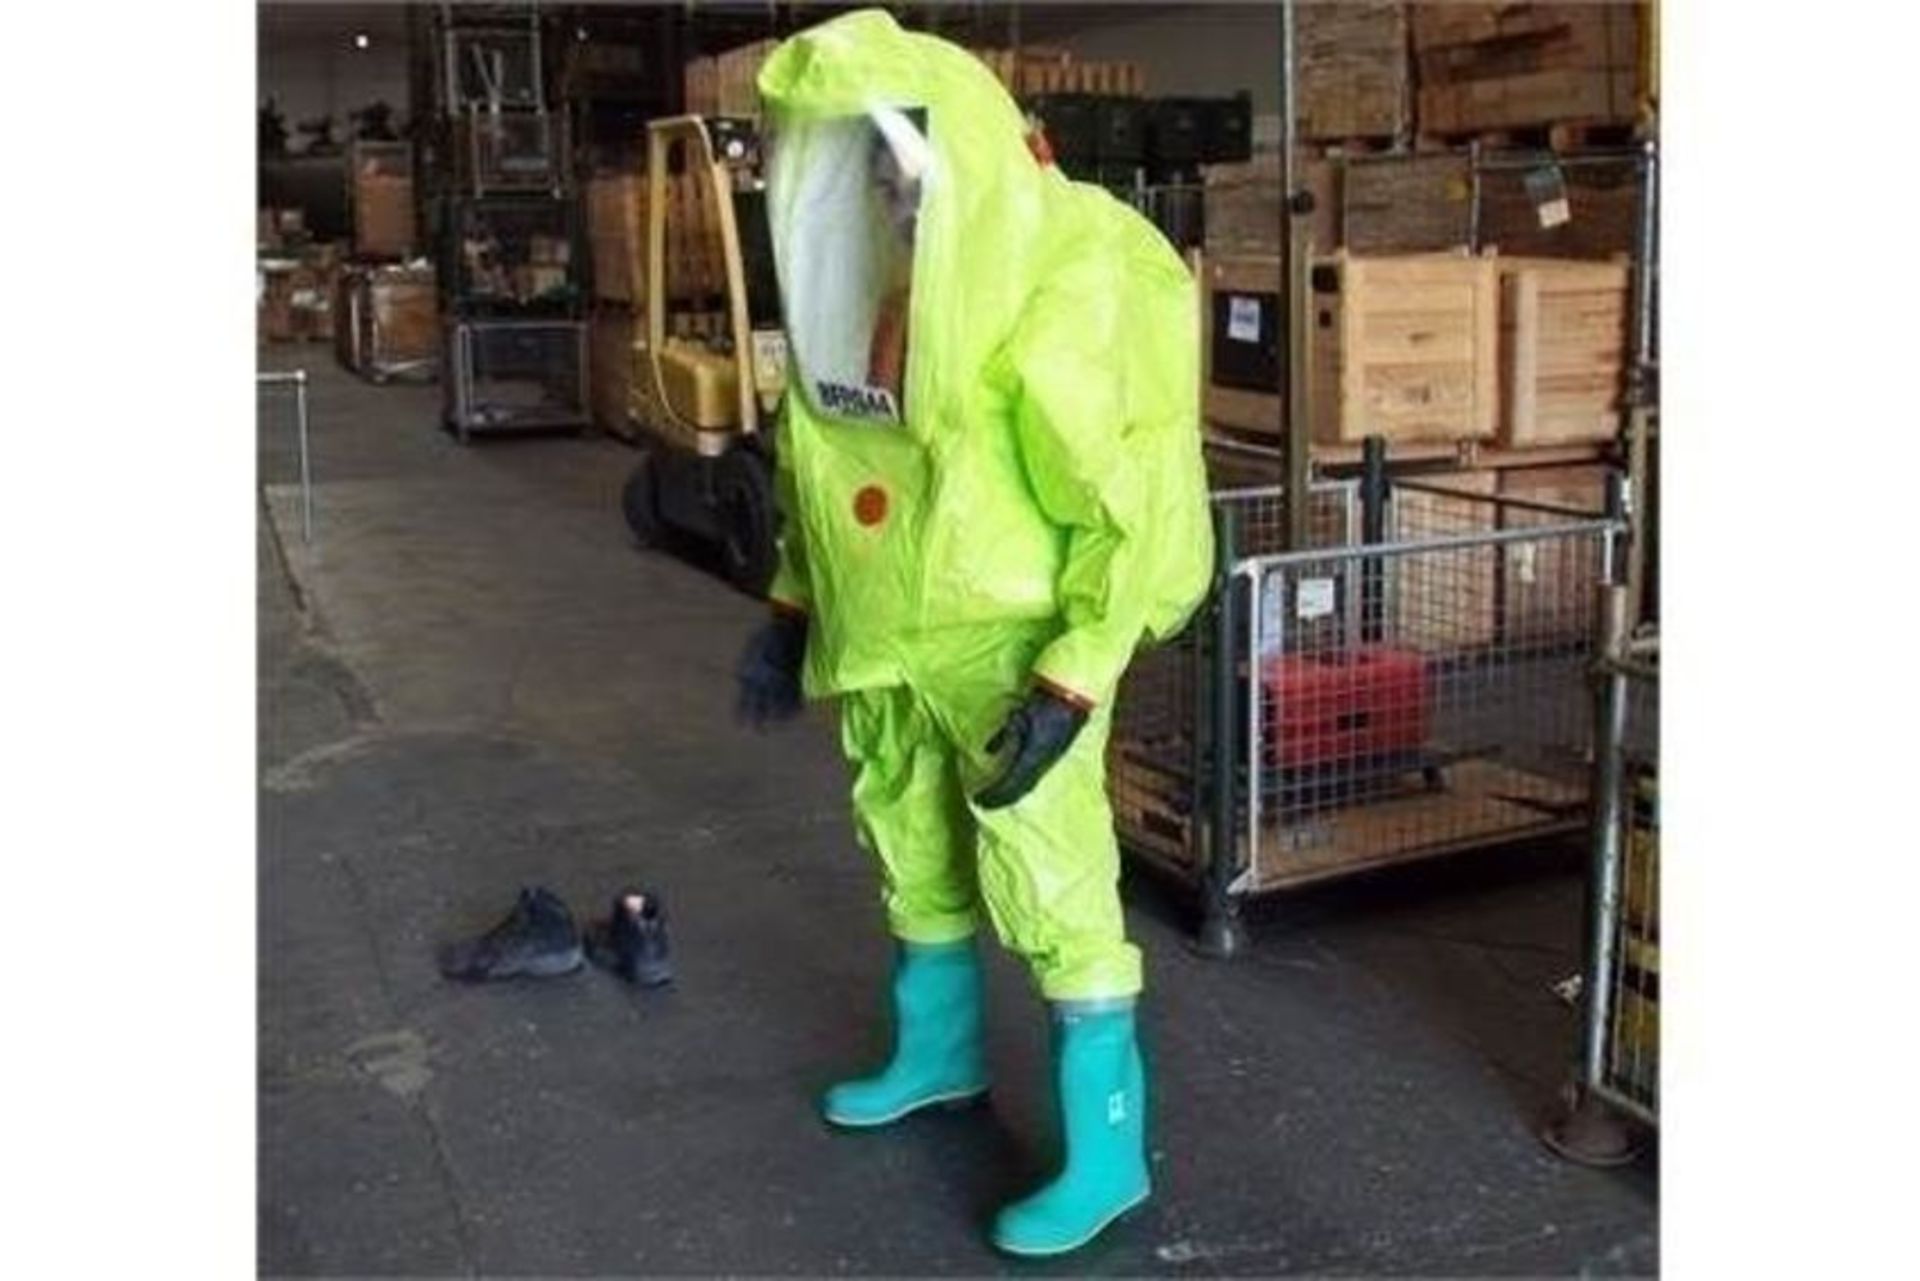 10 x Respirex Tychem TK Gas-Tight Hazmat Suit Type 1A with Attached Boots and Gloves - Image 5 of 11